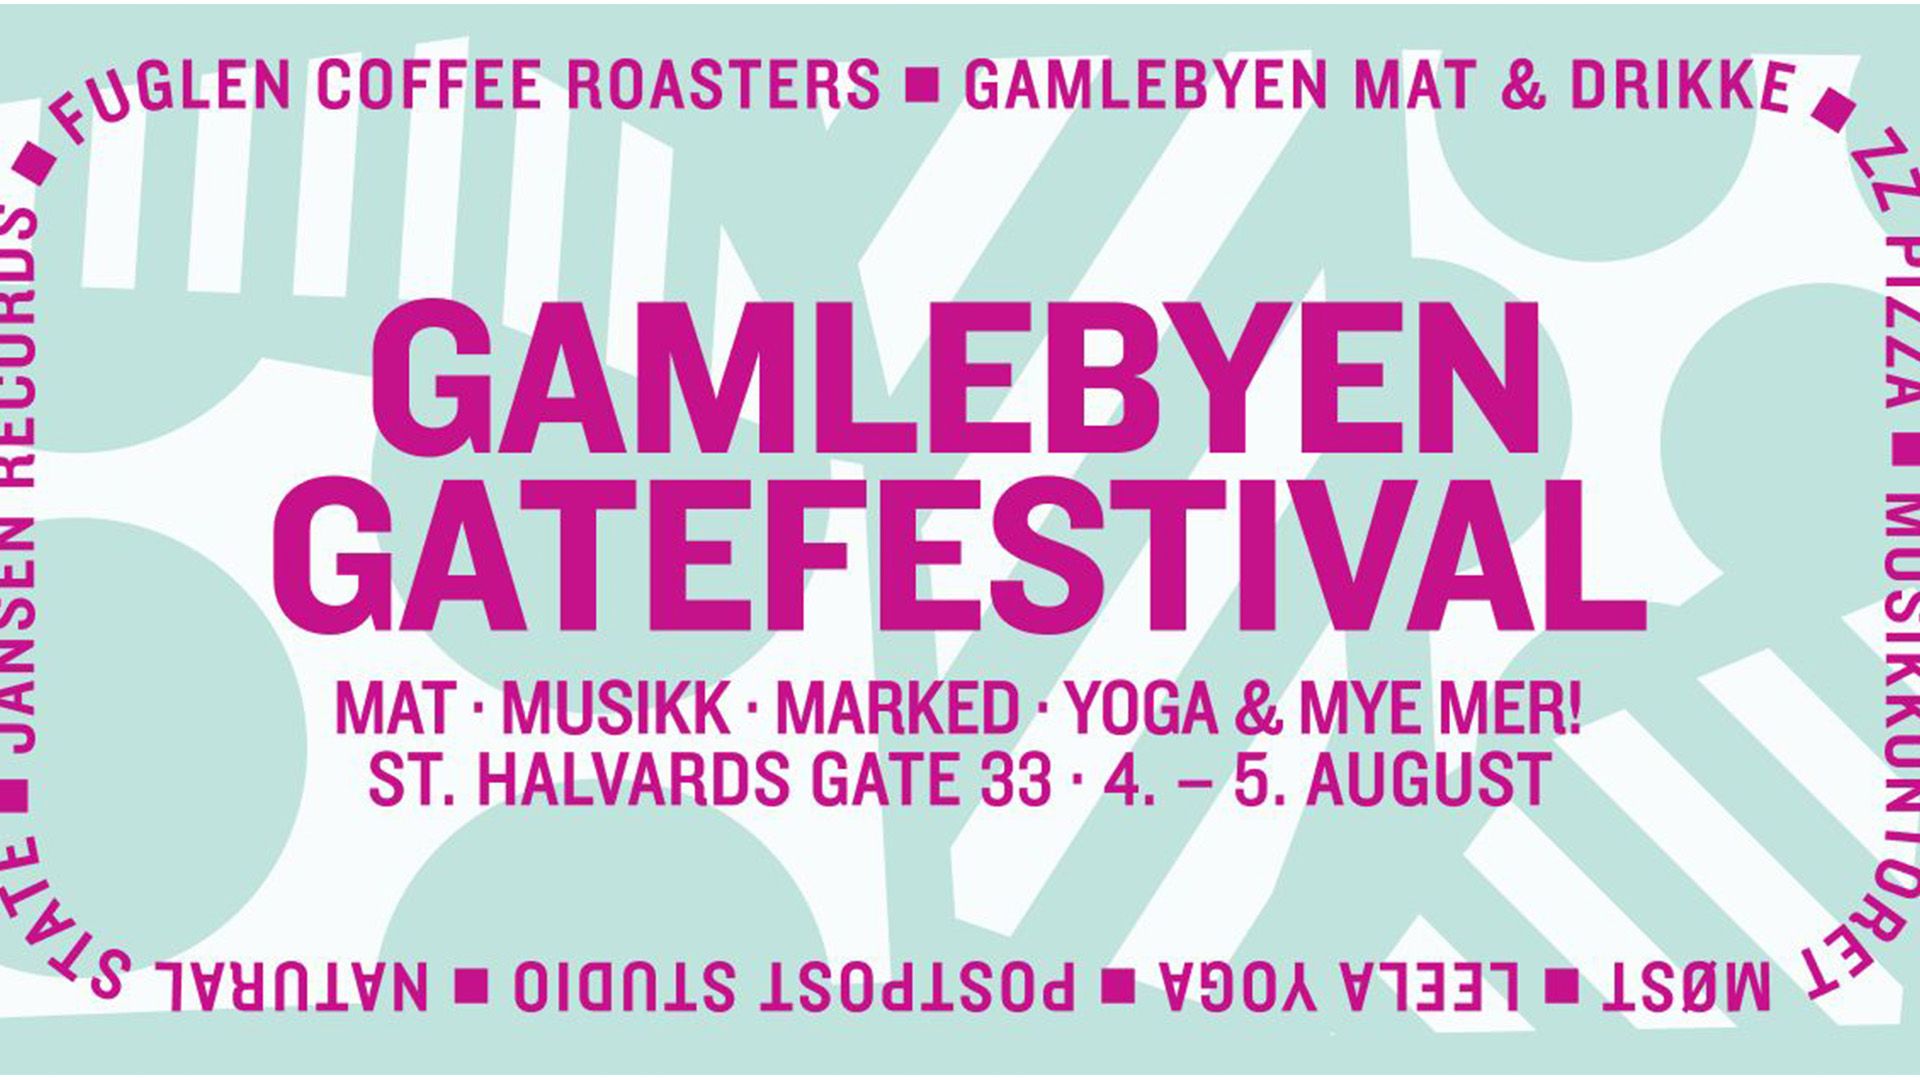 Cover Image for Broadcast is the official app guide for Gamlebyen Gatefestival!